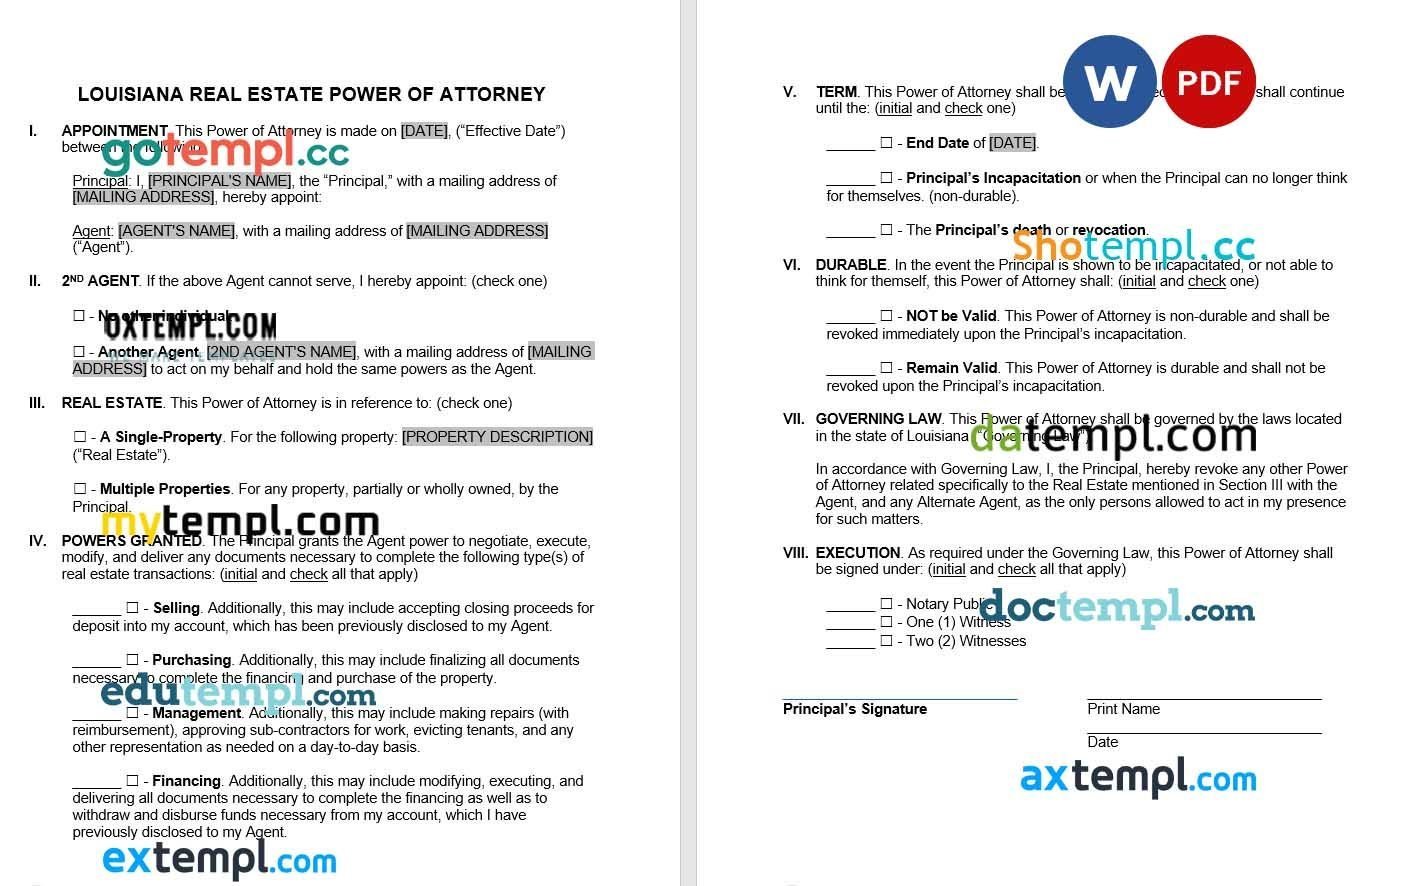 Co-Working Space Rental Agreement Word example, fully editable